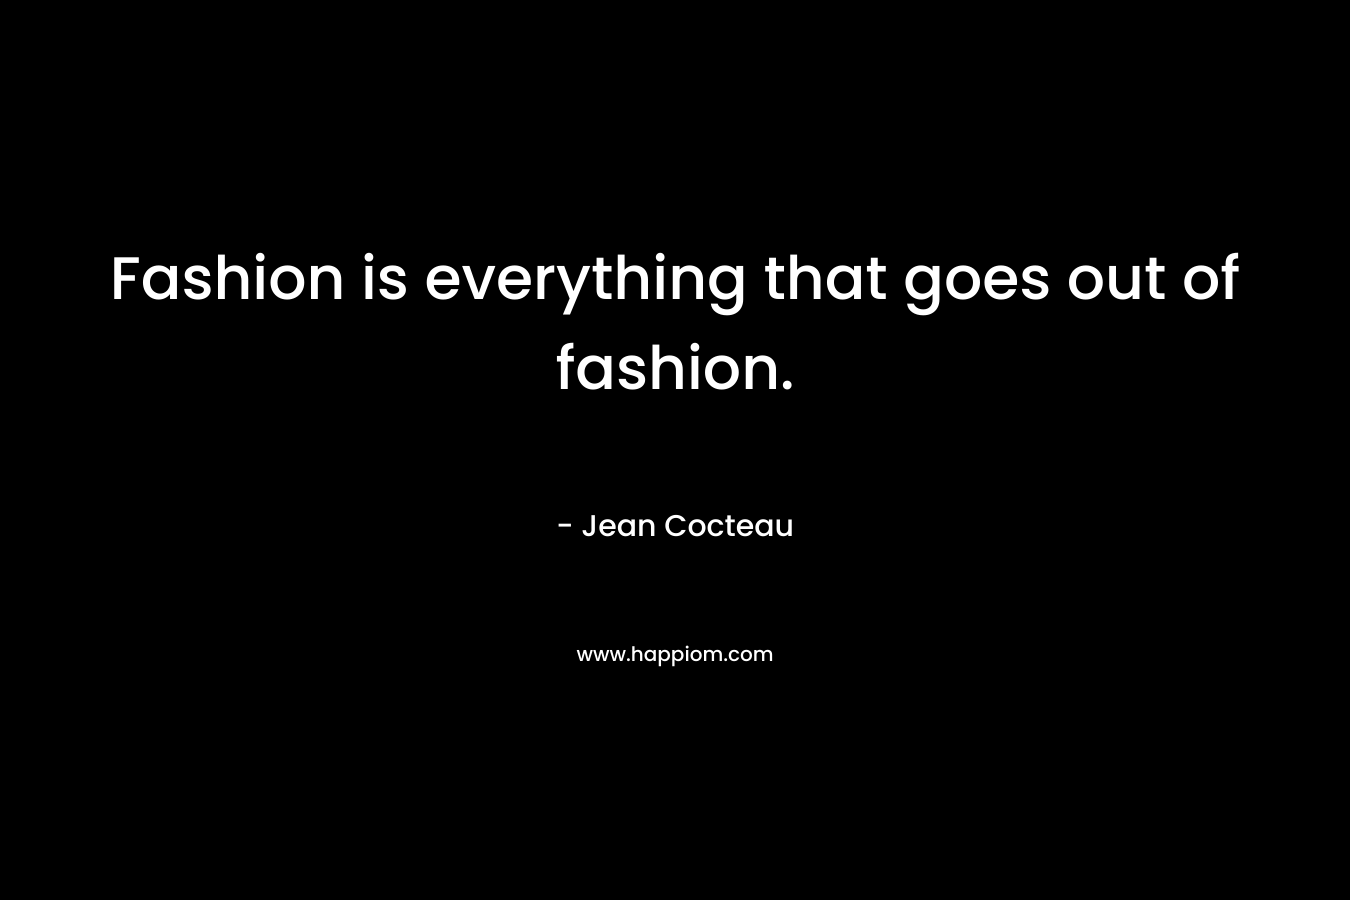 Fashion is everything that goes out of fashion.